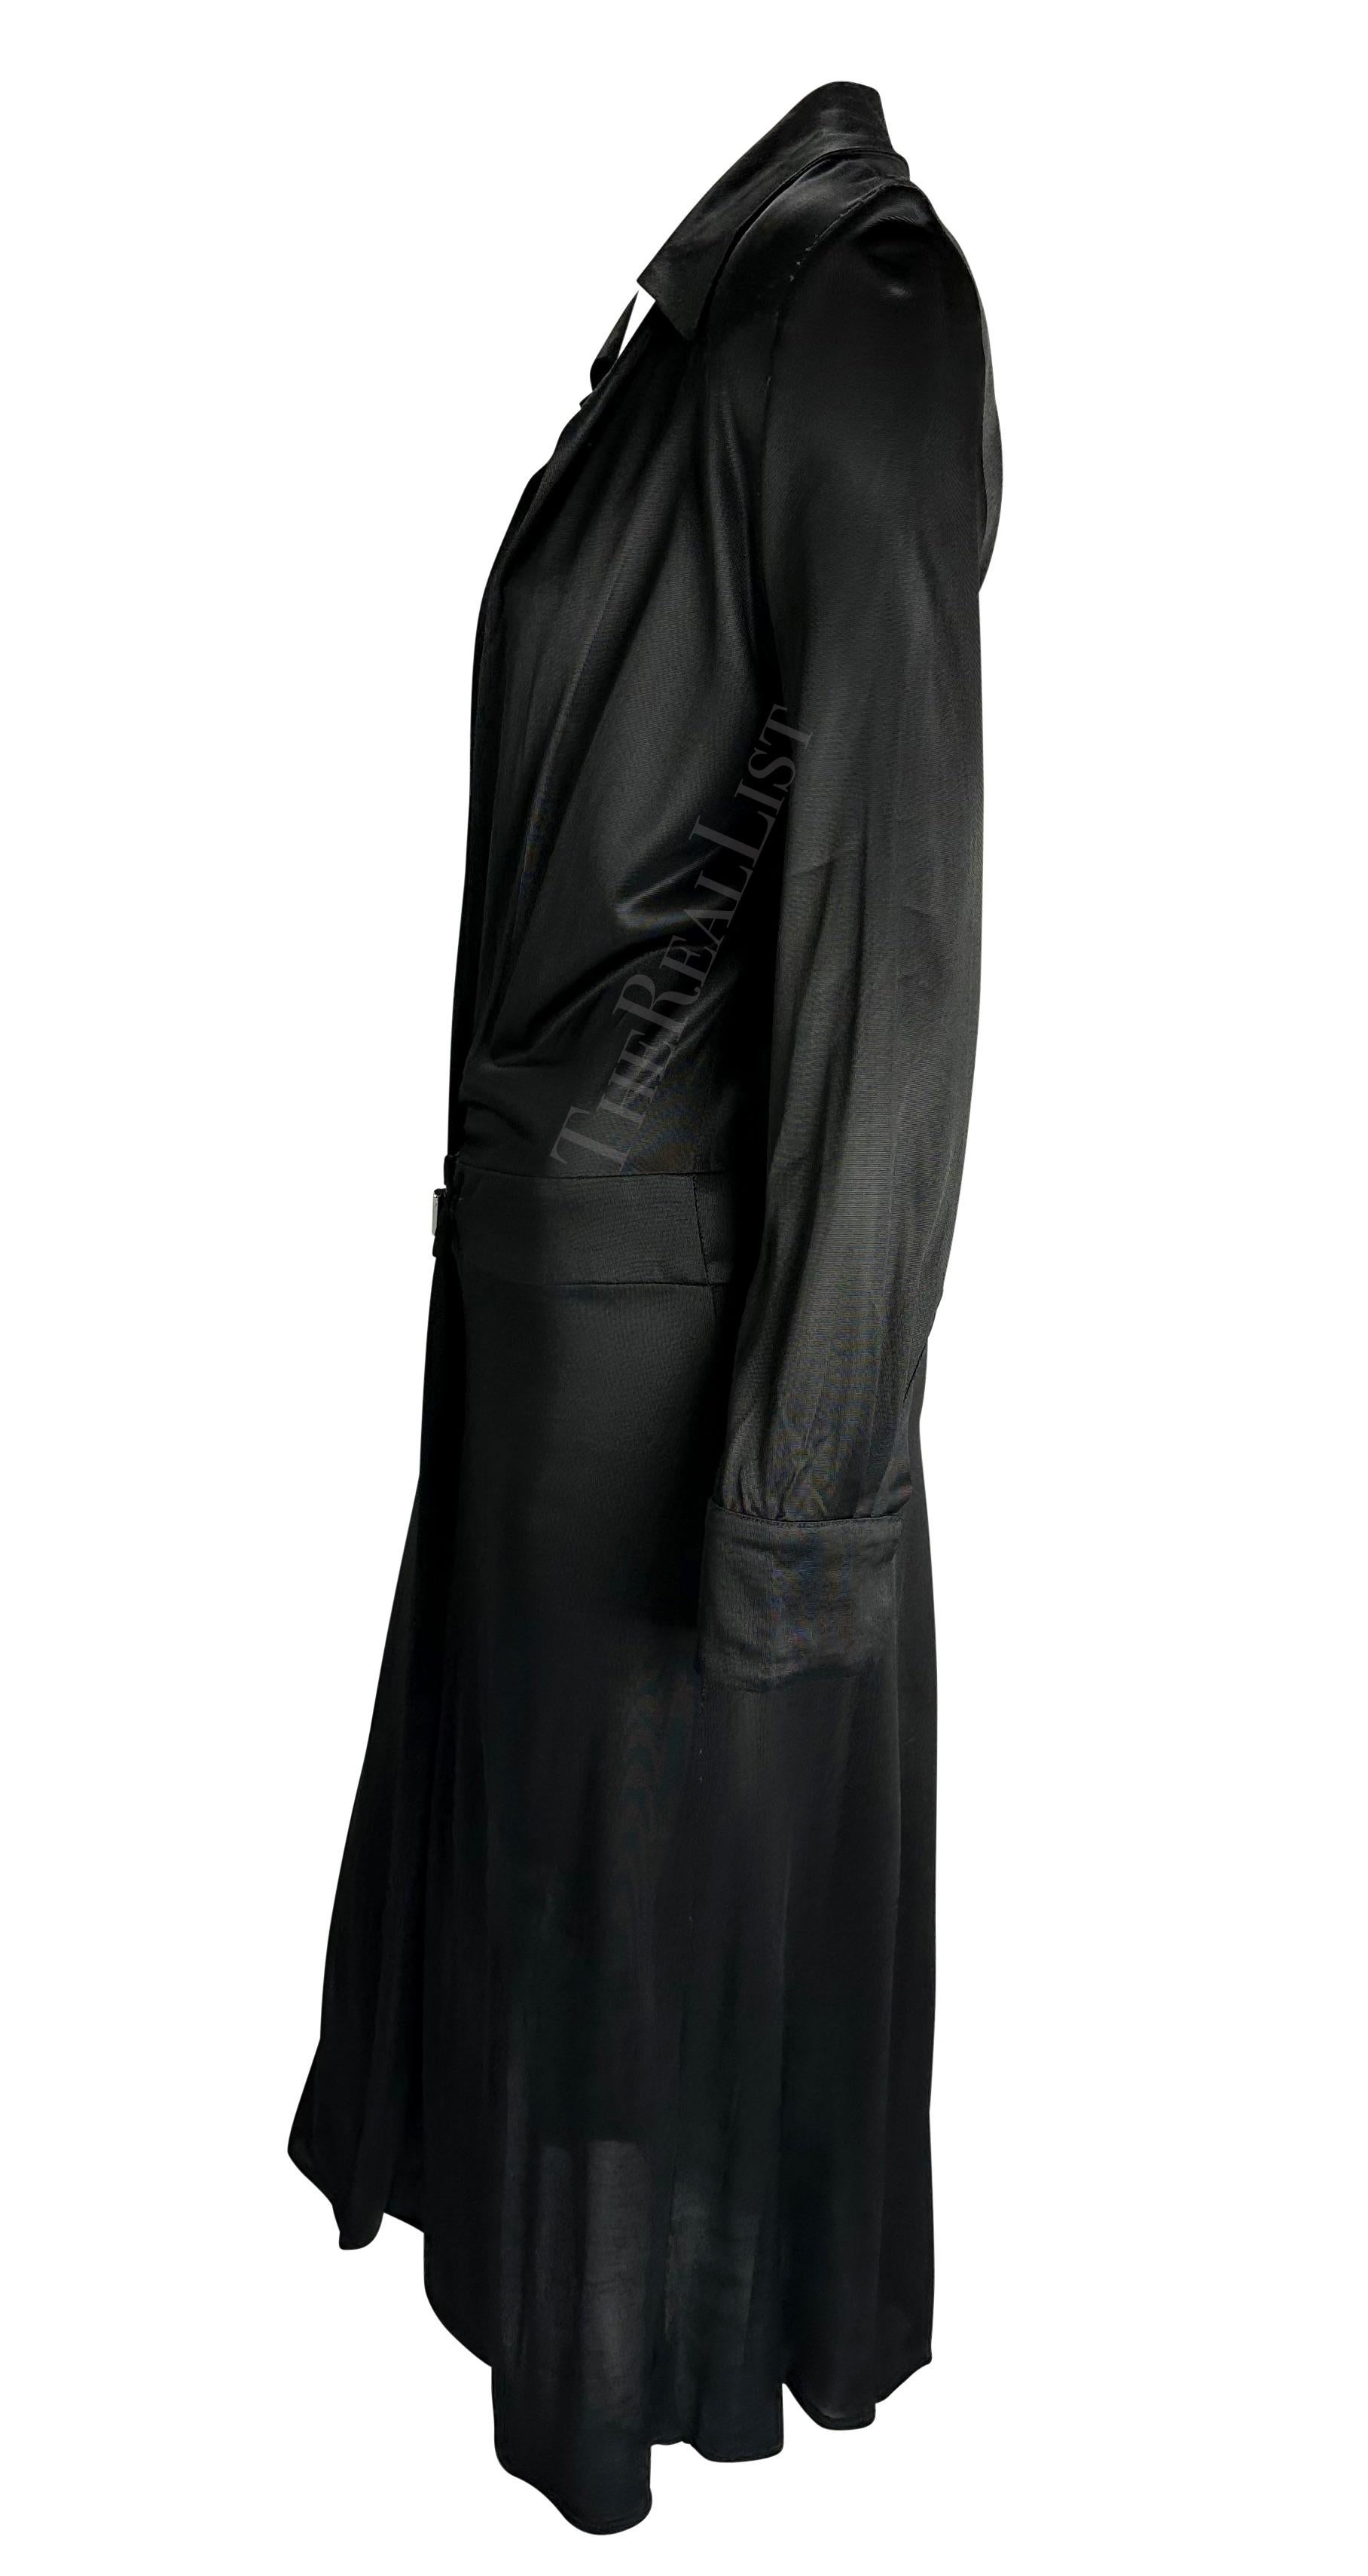 S/S 2000 Gucci by Tom Ford Runway Plunging Neckline Black Viscose Runway Dress For Sale 2